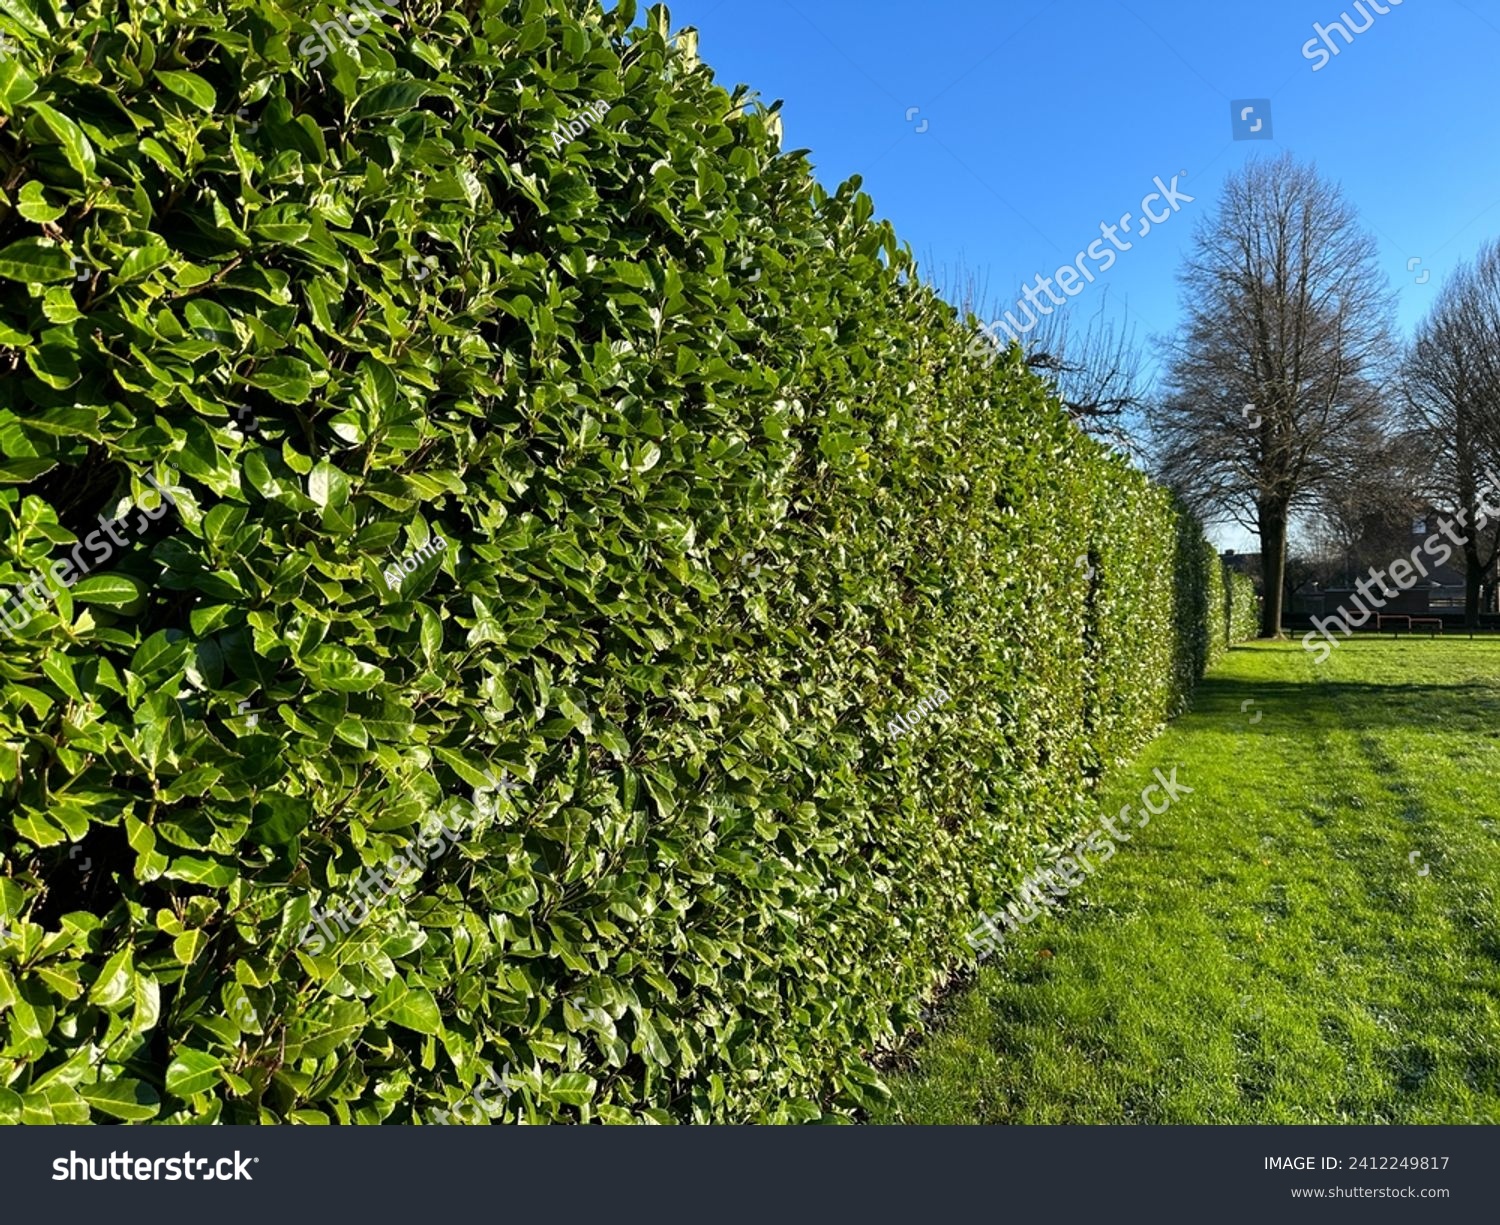 Green hedge Cherry Laurel. Cherry Laurel is ideal as a privacy screen or to reduce noise and wind. Its adaptability and striking appearance make Cherry Laurel one of the most popular types of Laurel  #2412249817